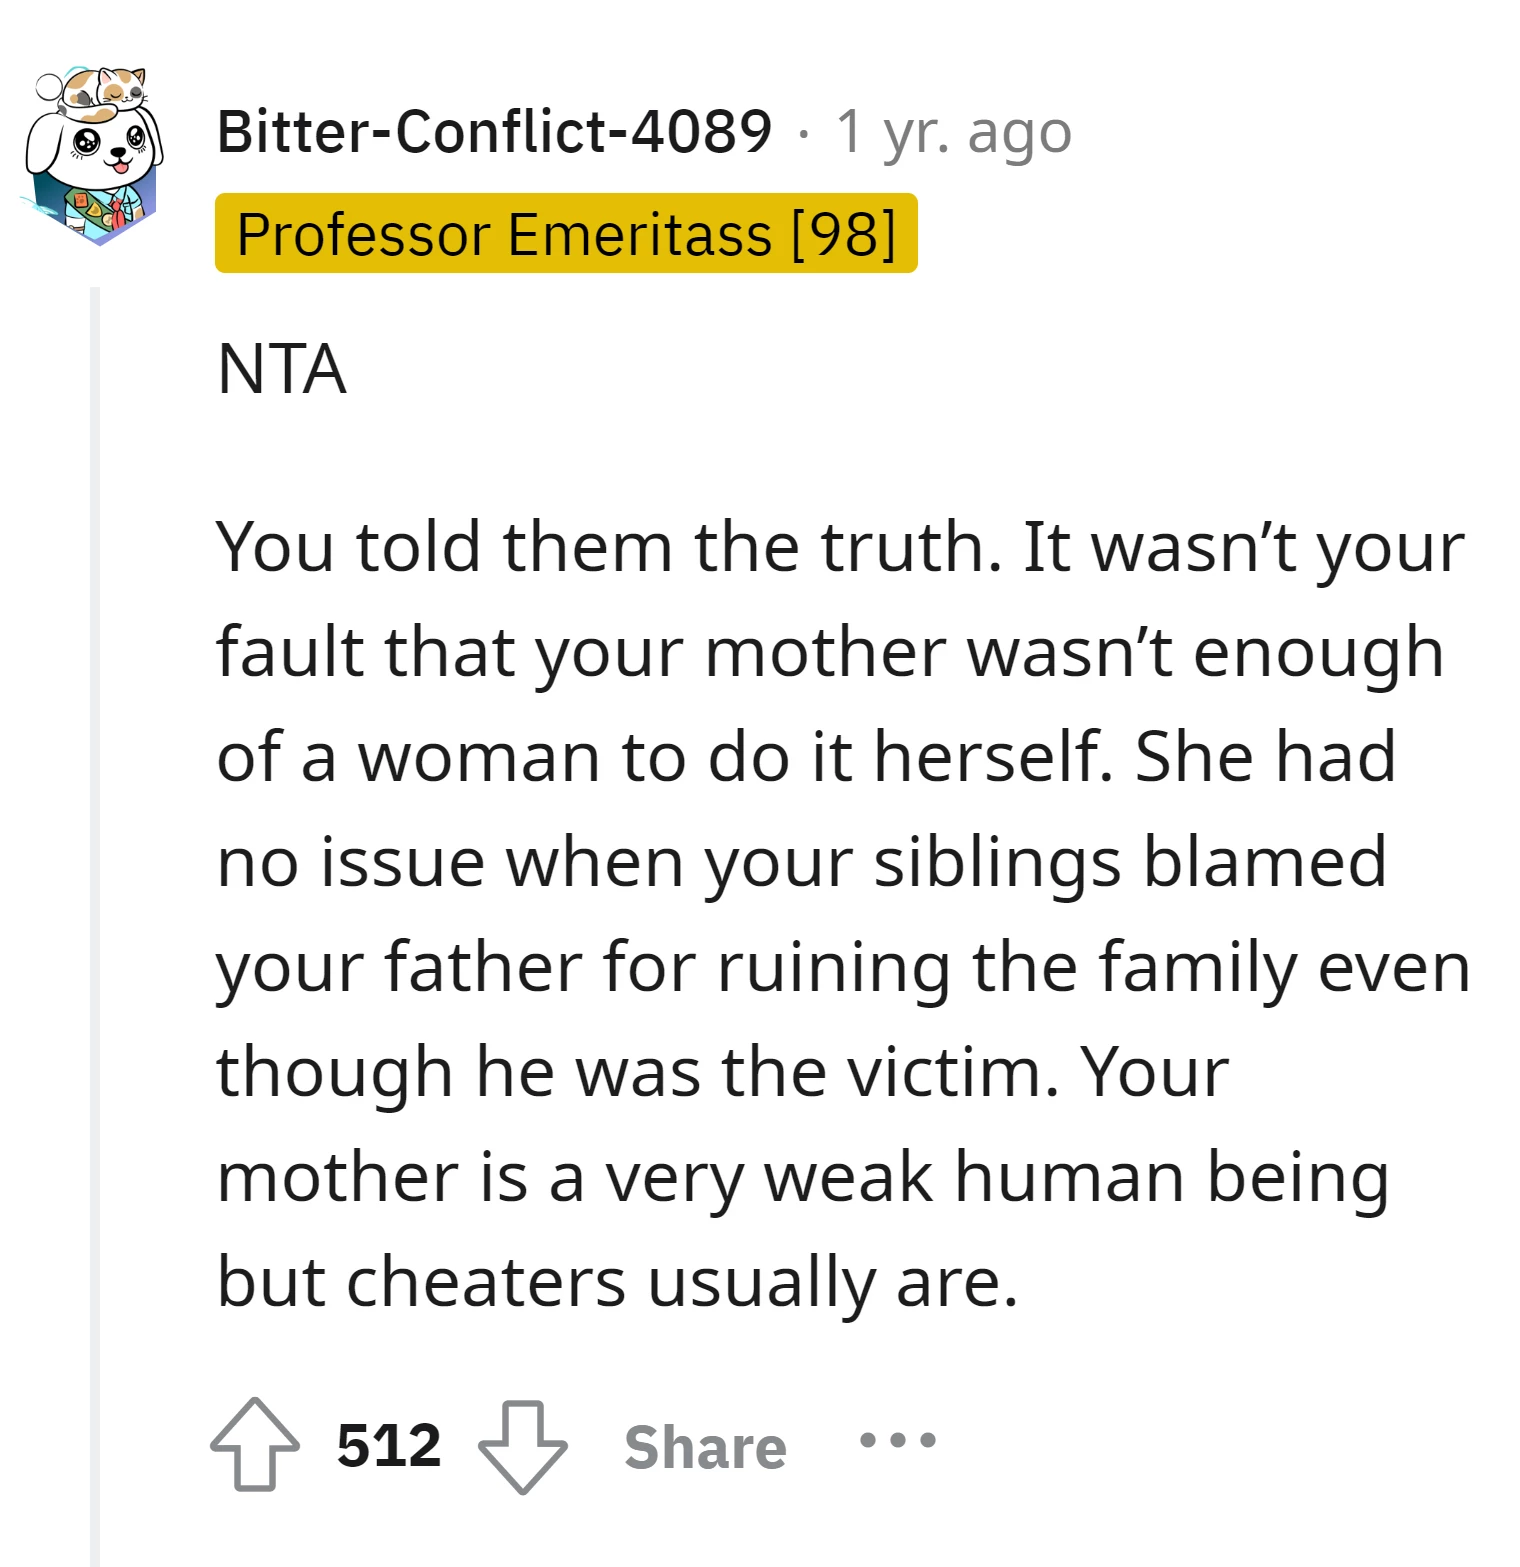 Commenter criticizes the mother for not taking responsibility